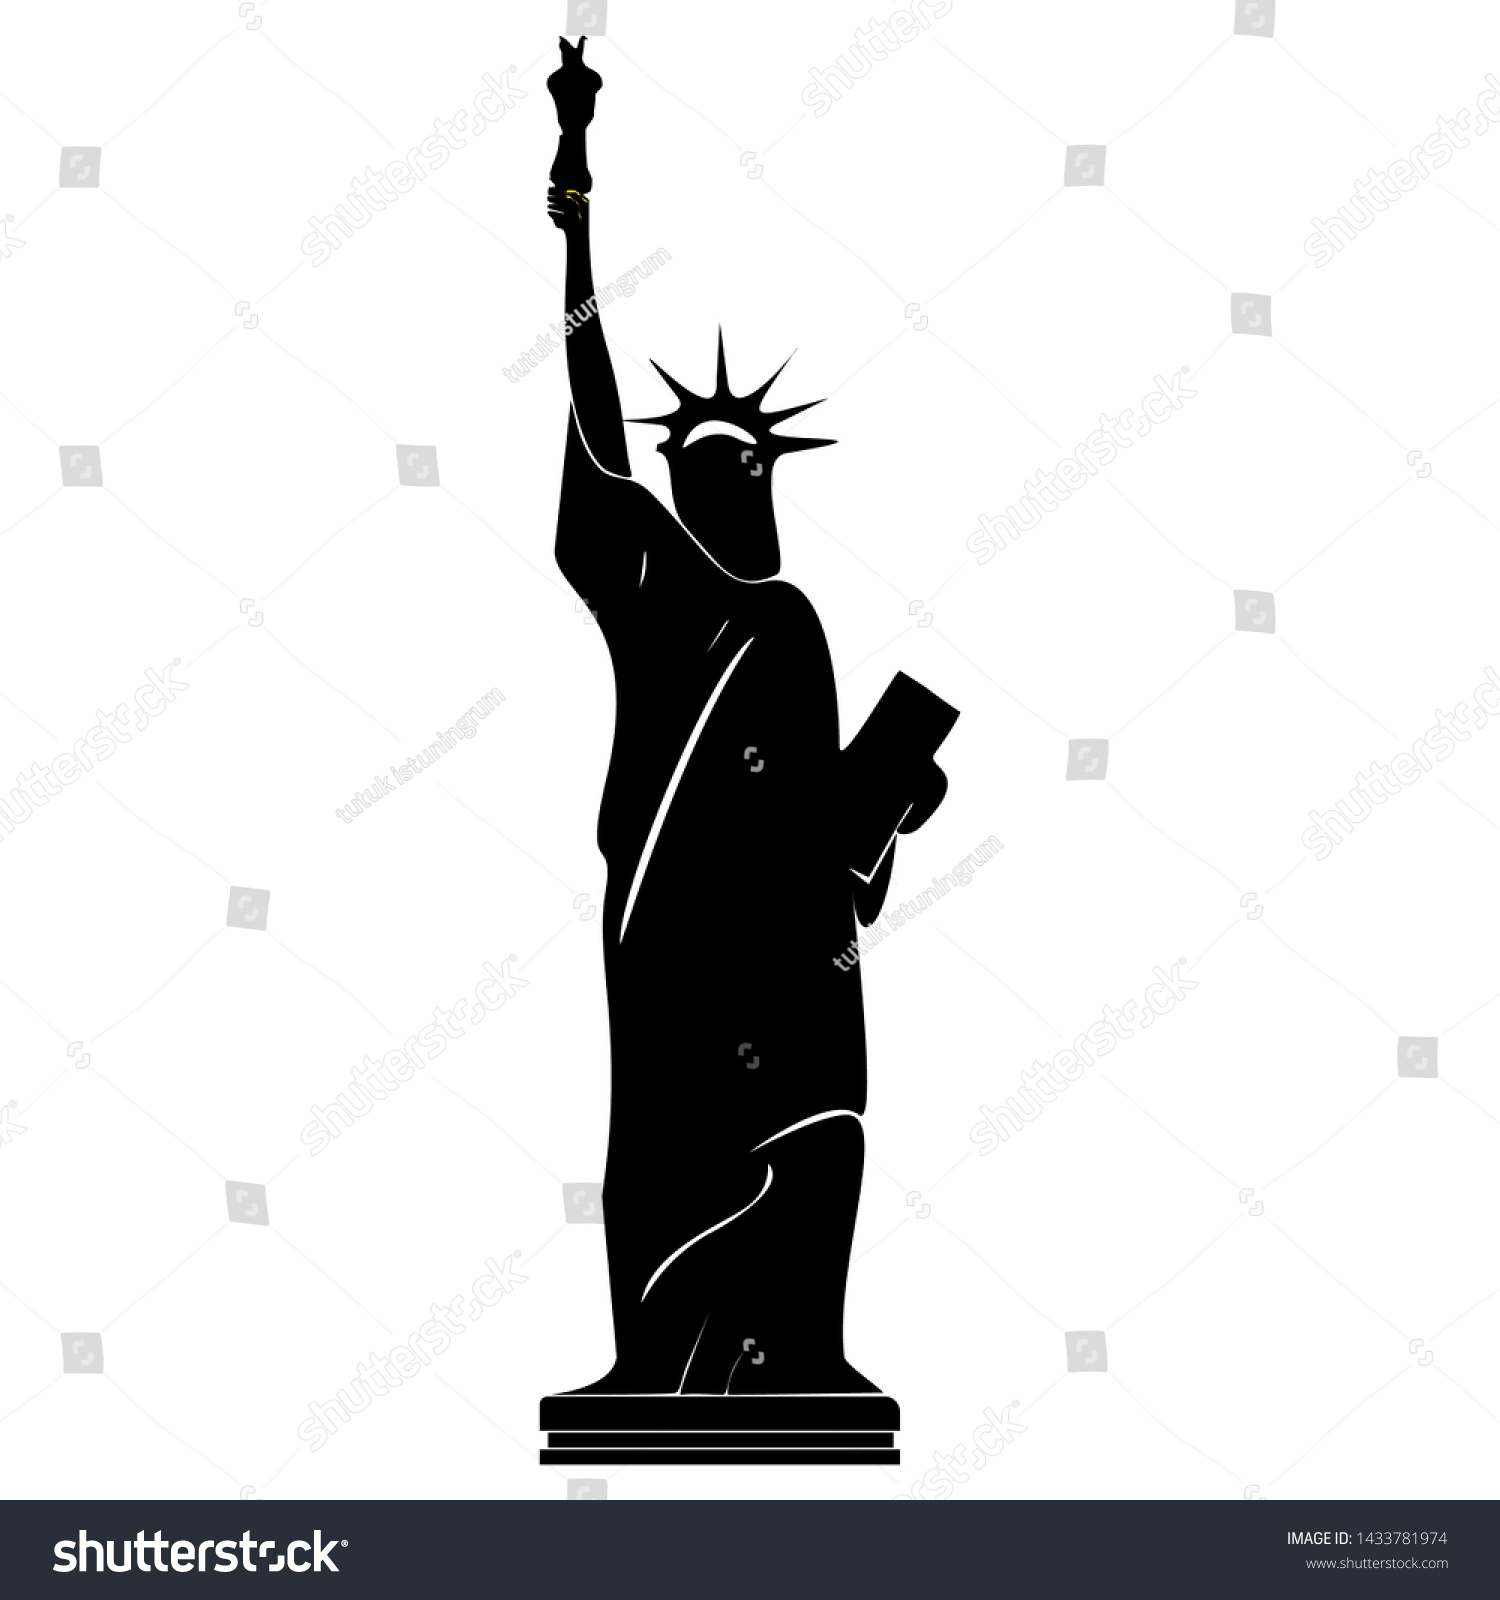 Vector image of Statue of Liberty #1433781974